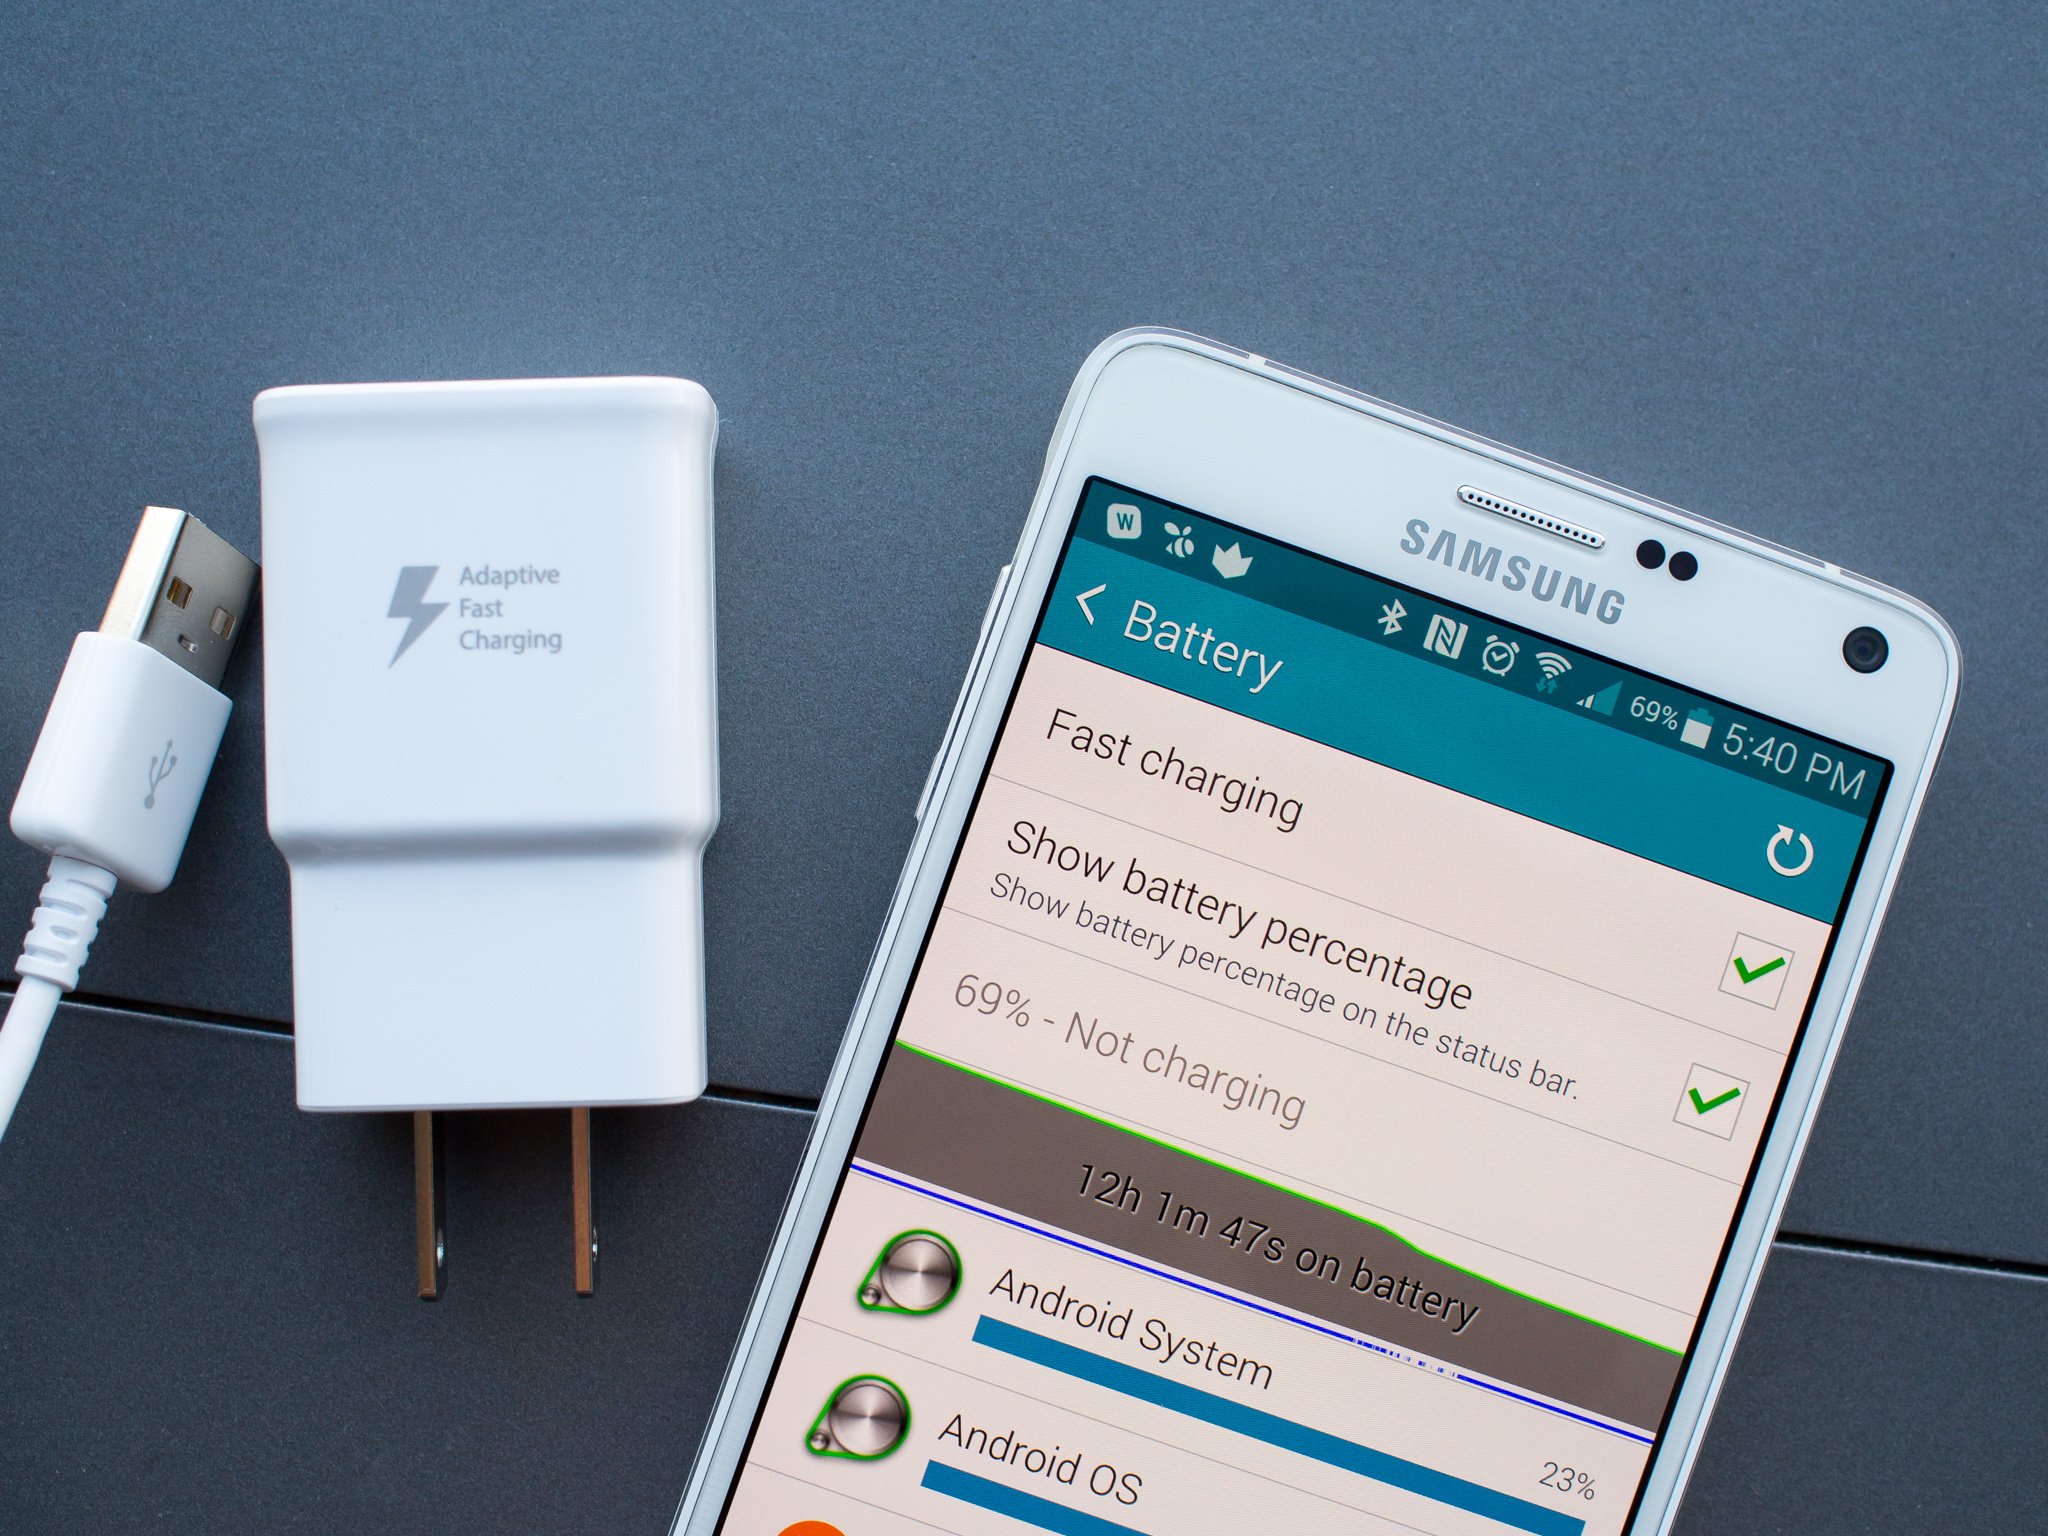 Galaxy Note 4 battery life tips | Android Central